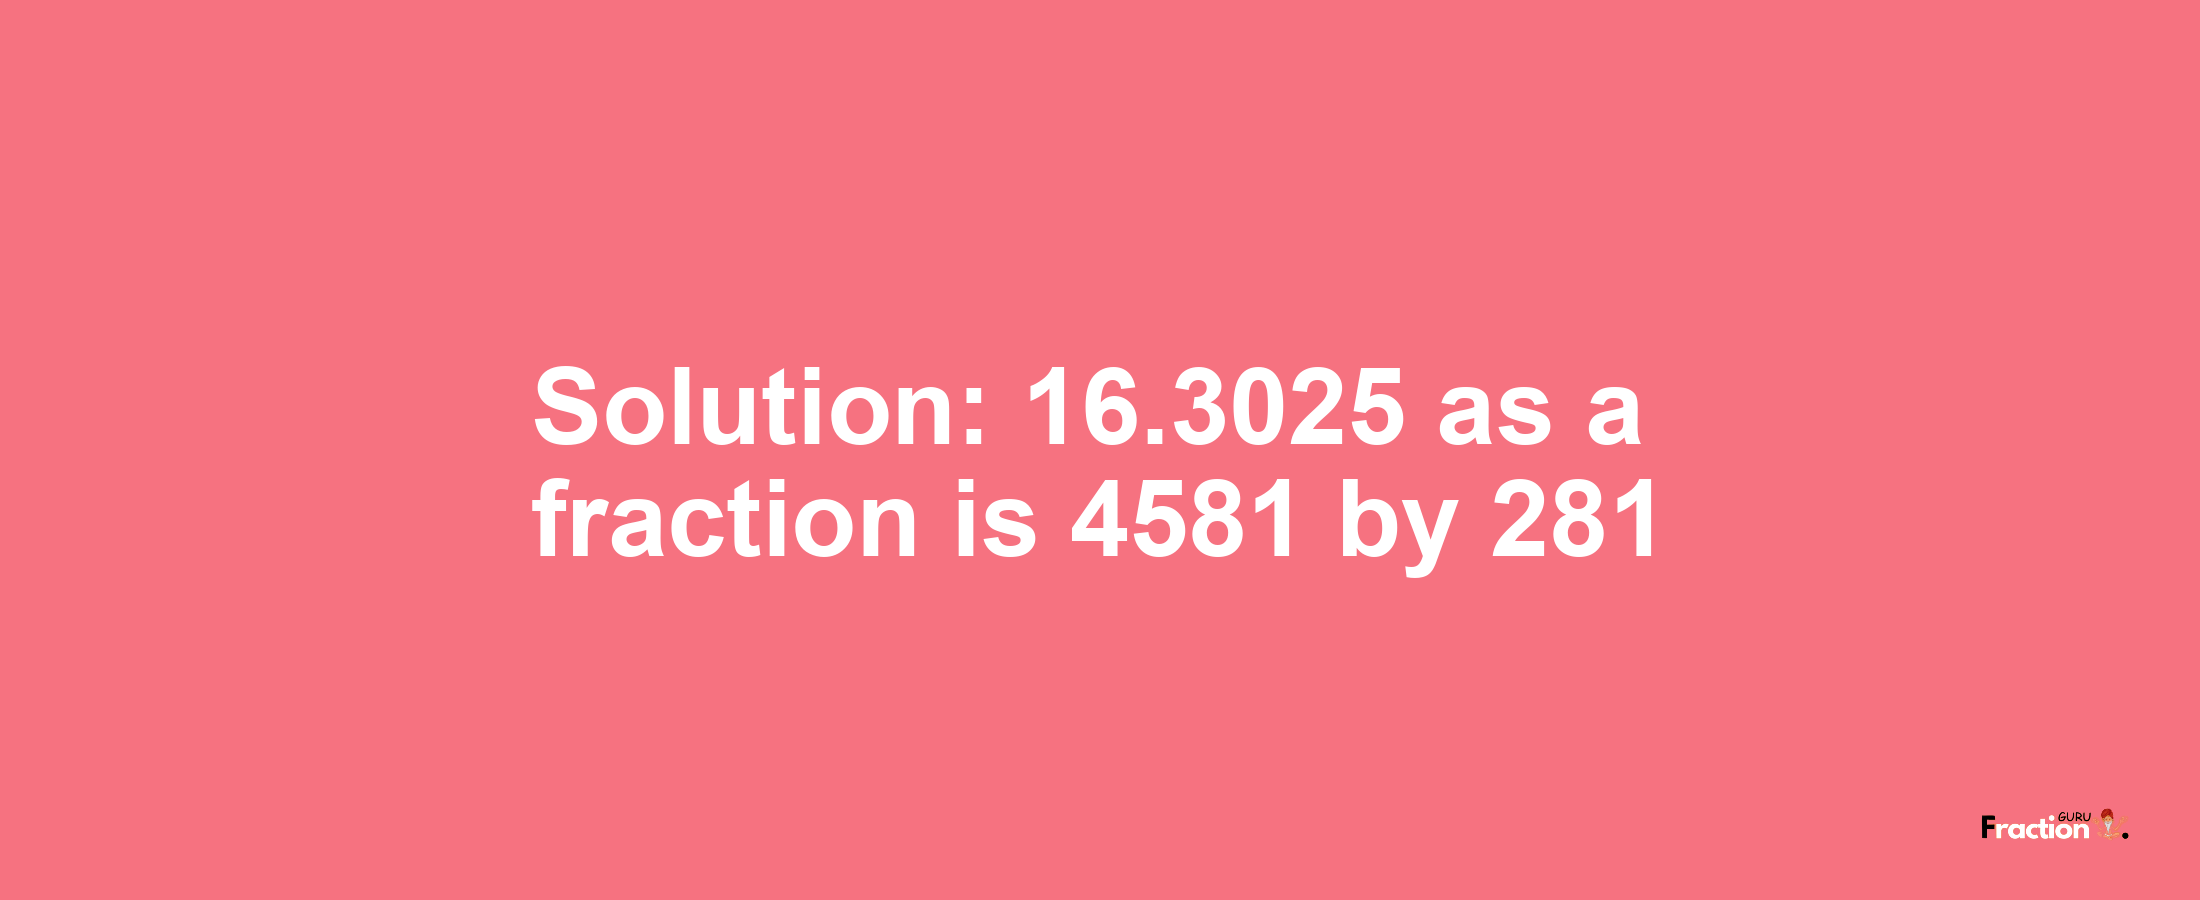 Solution:16.3025 as a fraction is 4581/281